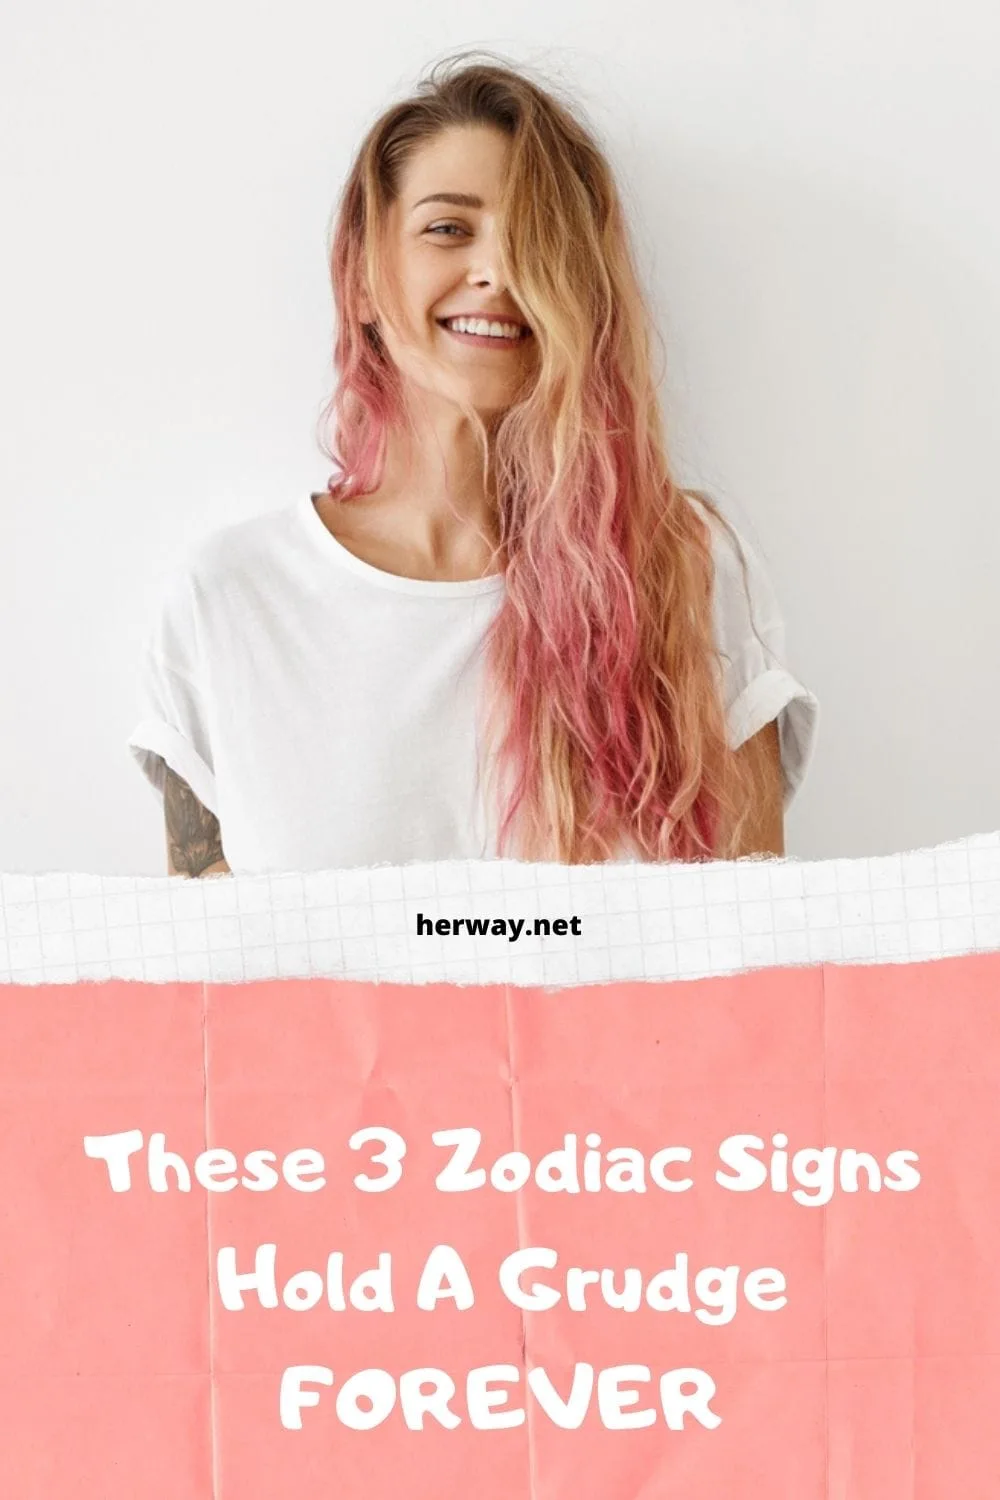 These 3 Zodiac Signs Hold A Grudge FOREVER